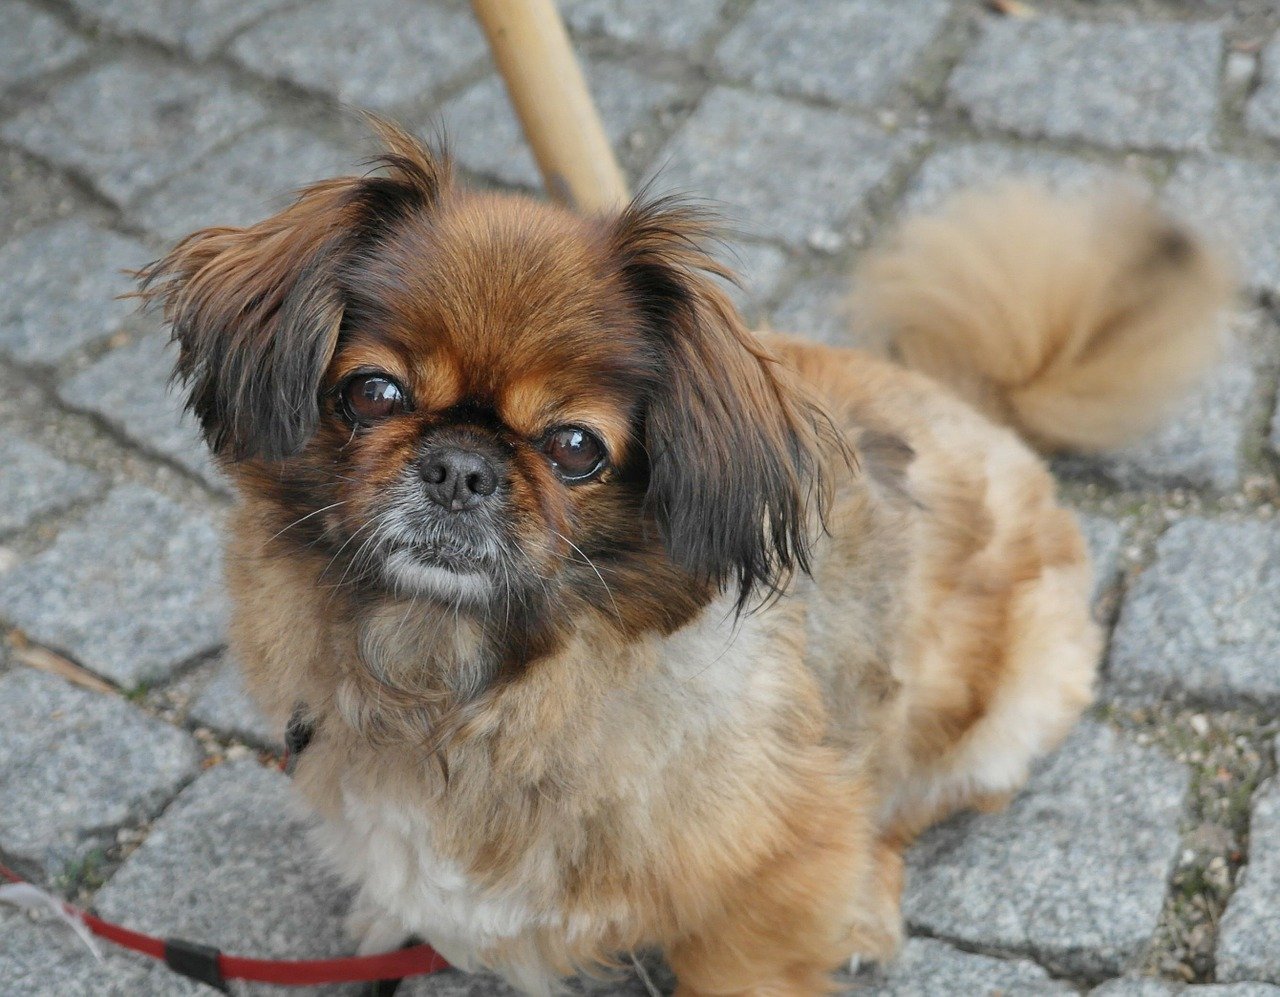 The Pekingese dog - how much does it cost?